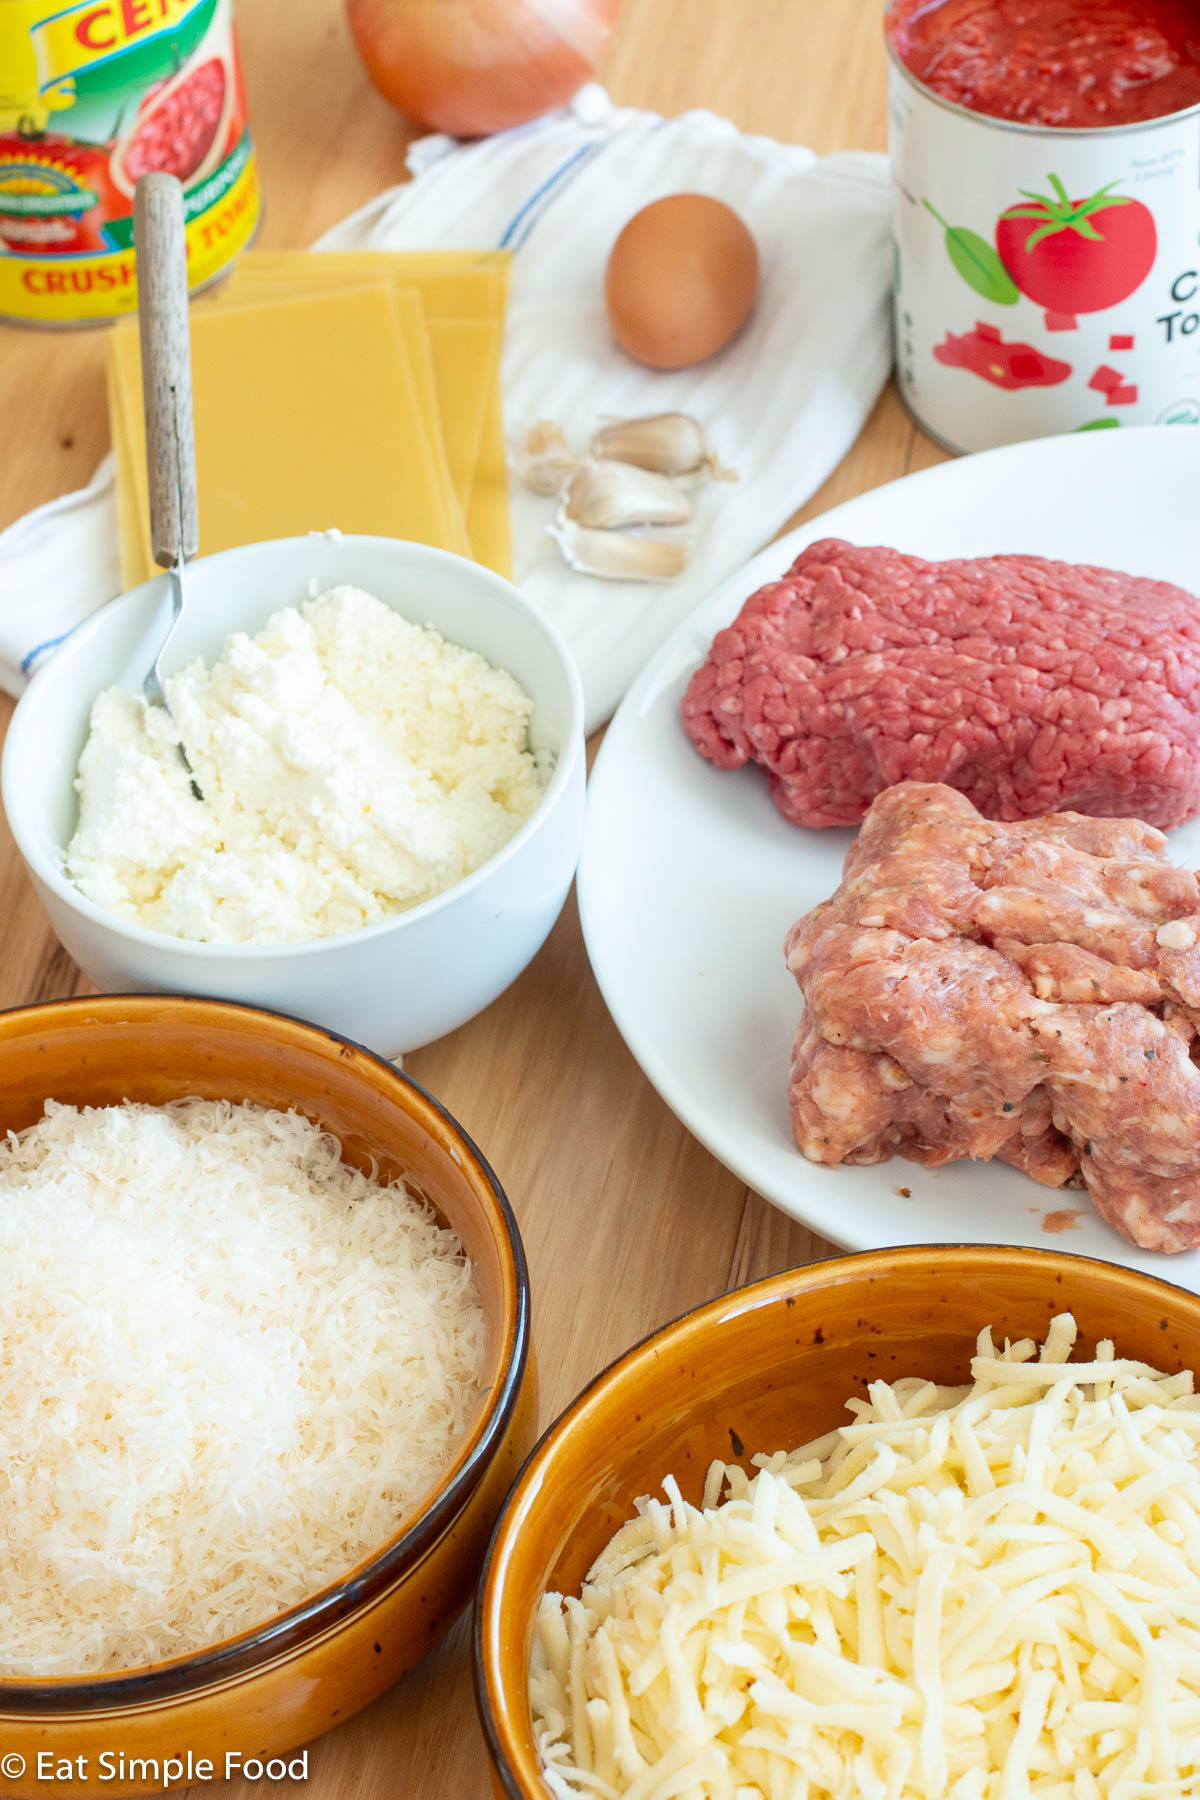 Ingredients on a wood table: bowl of grated Parmesan, bowl of grated mozzarella, plate of both ground sausage and ground beef, bowl of ricotta cheese, raw garlic, 2 cans crushed tomatoes, raw garlic, one egg, and one onion.